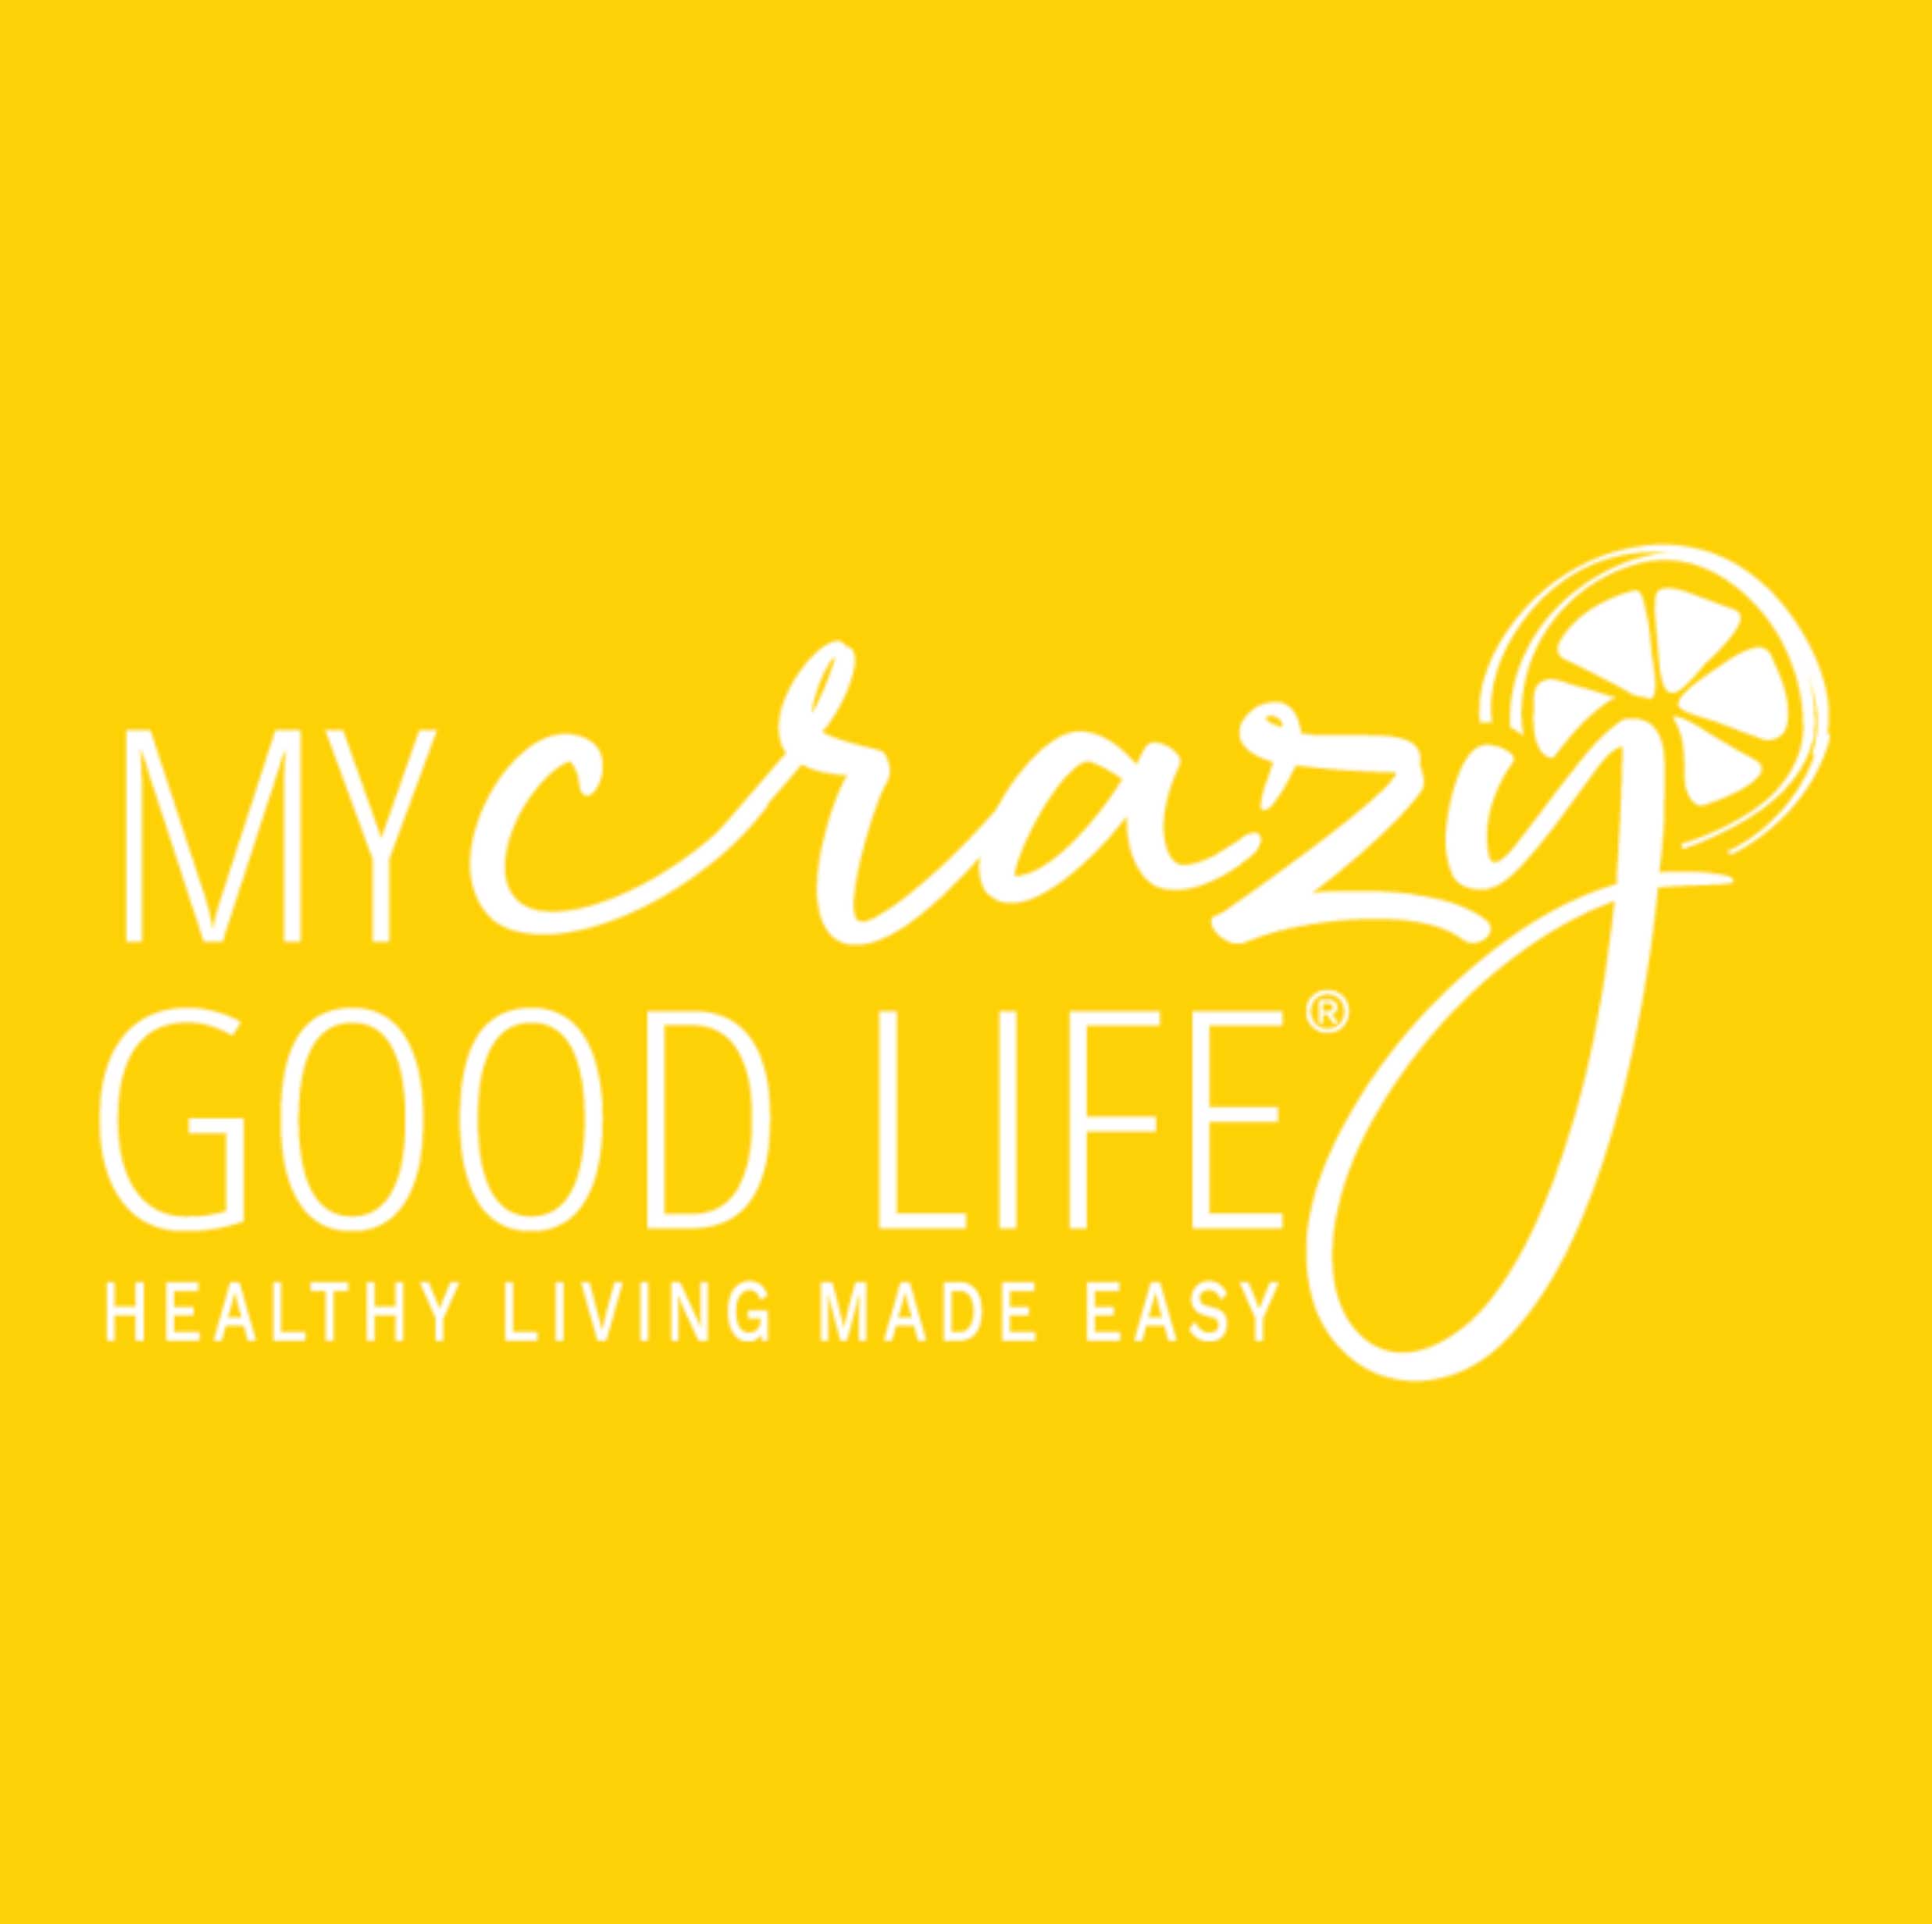 21 Day Fix Easy Meal Plan for Bracket E : My Crazy Good Life